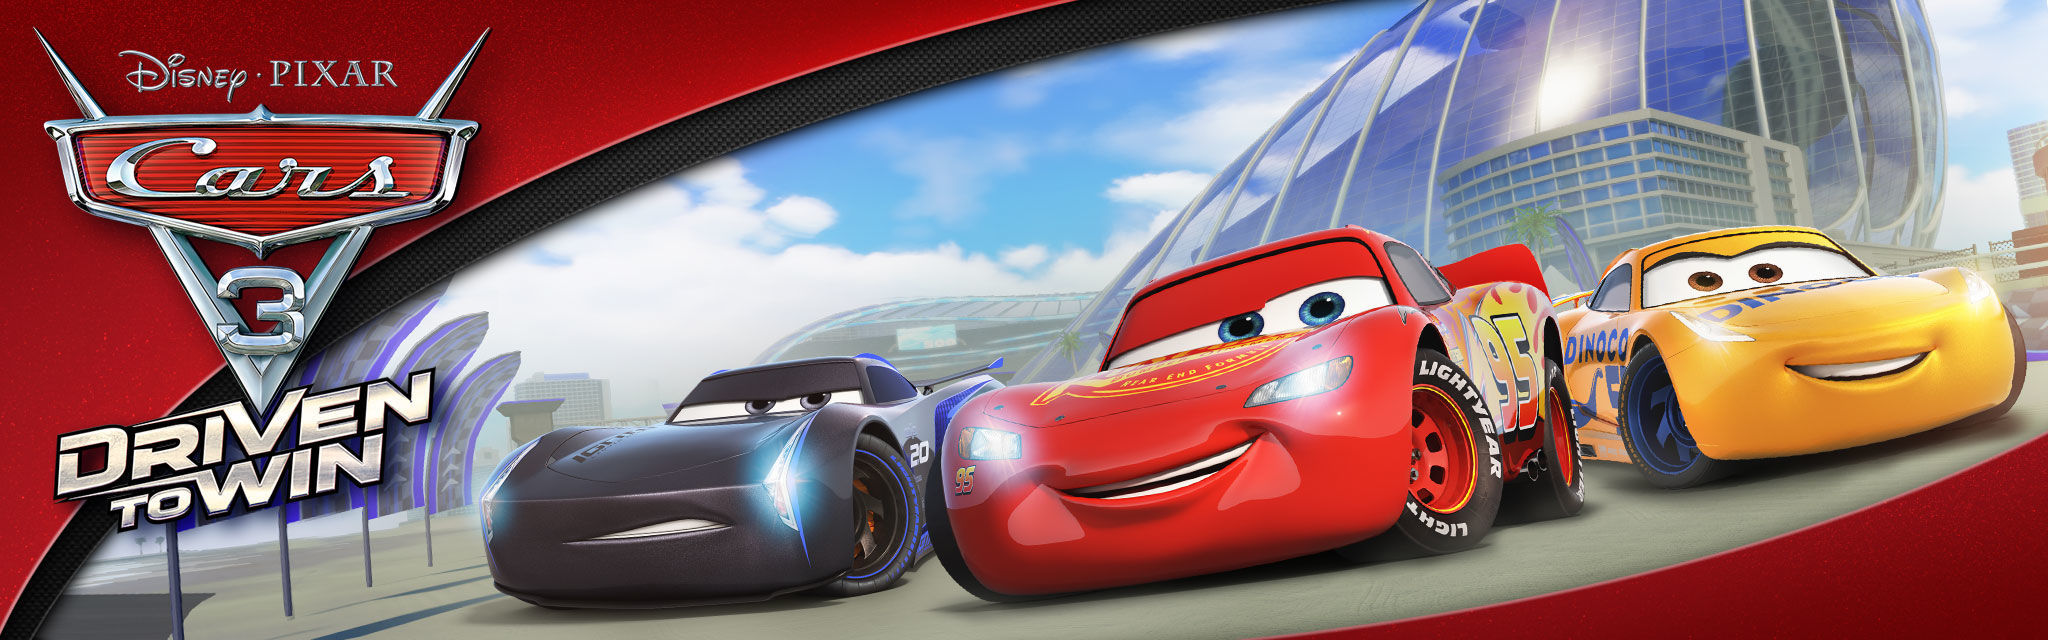 Driven To Win - Cars 3 Driven To Win , HD Wallpaper & Backgrounds